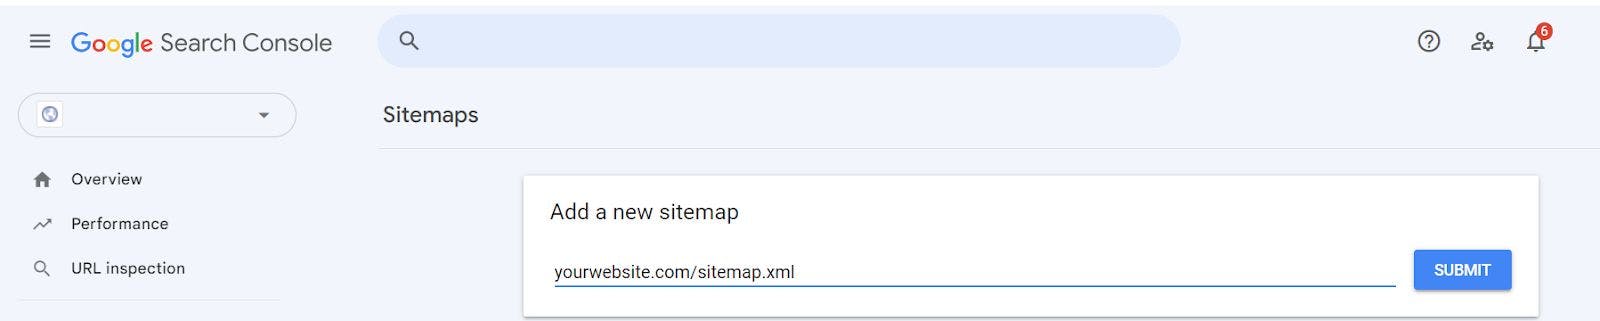 Google Search Console - Sitemap submission - Technical SEO 